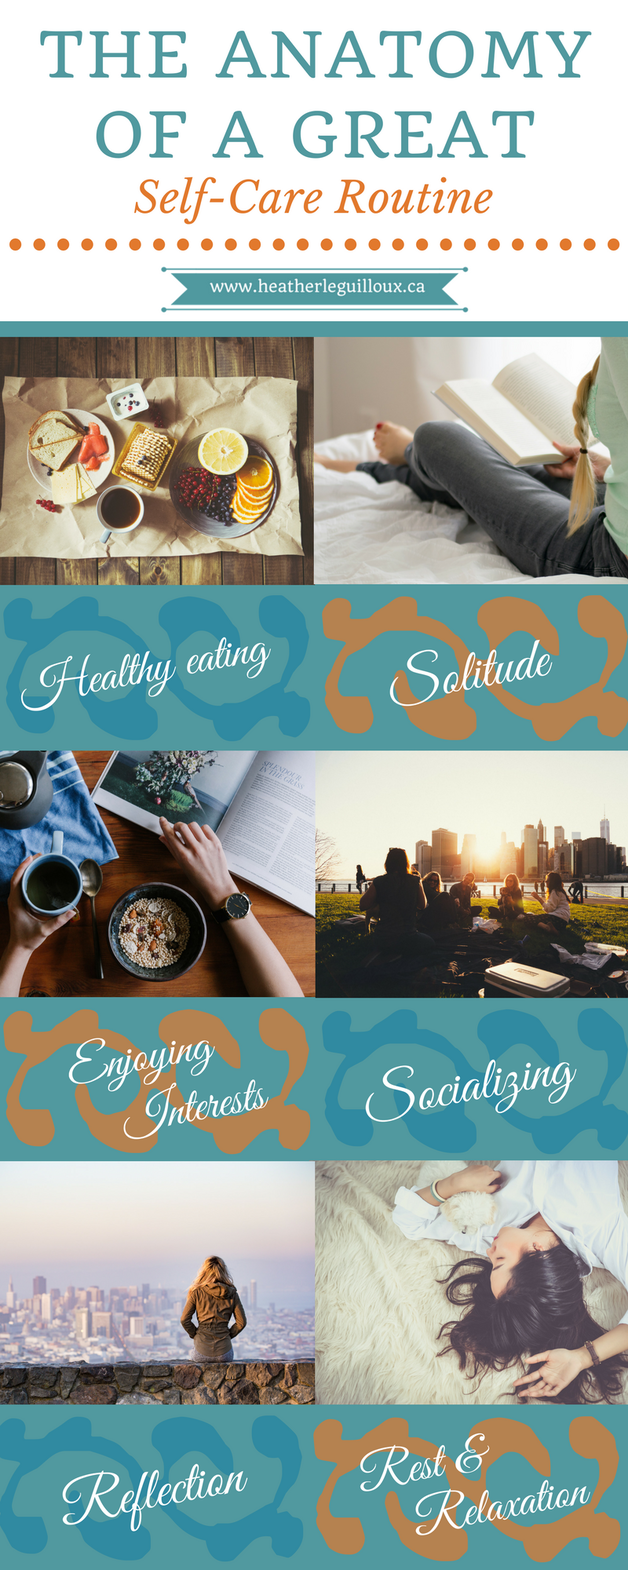 Blog article @hleguilloux focusing on six fundamental areas of a self-care routine including #healthyeating #solitude #interests #socializing #reflection #rest & #relaxation - includes links & resources to help build your own great self-care routine! #selfcare #routine #wellness #blog